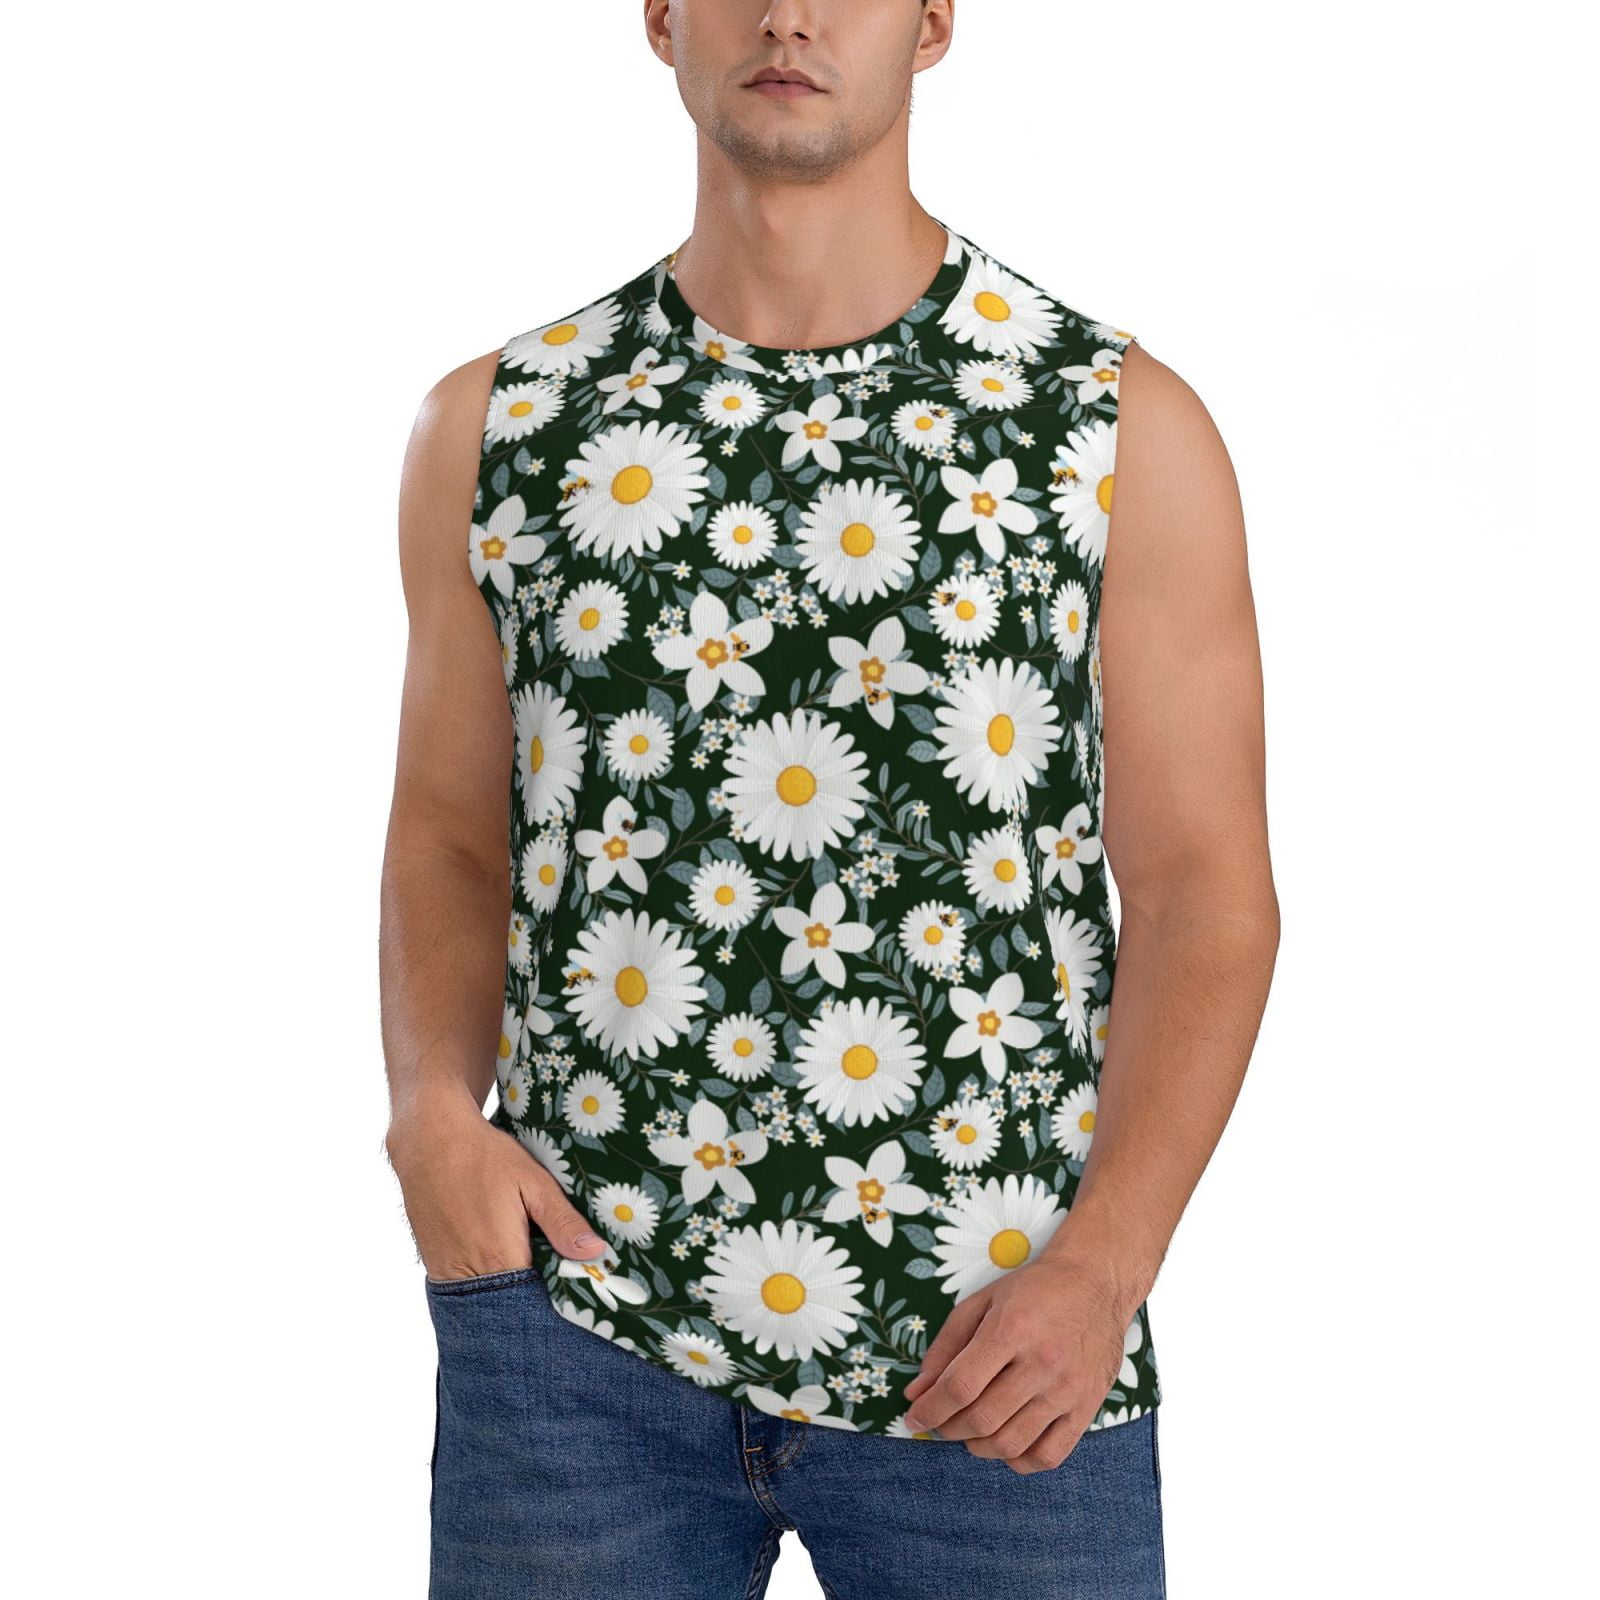 Adobk White Daisies And Bee Men'S Tank Top Muscle Workout Gym Shirts ...